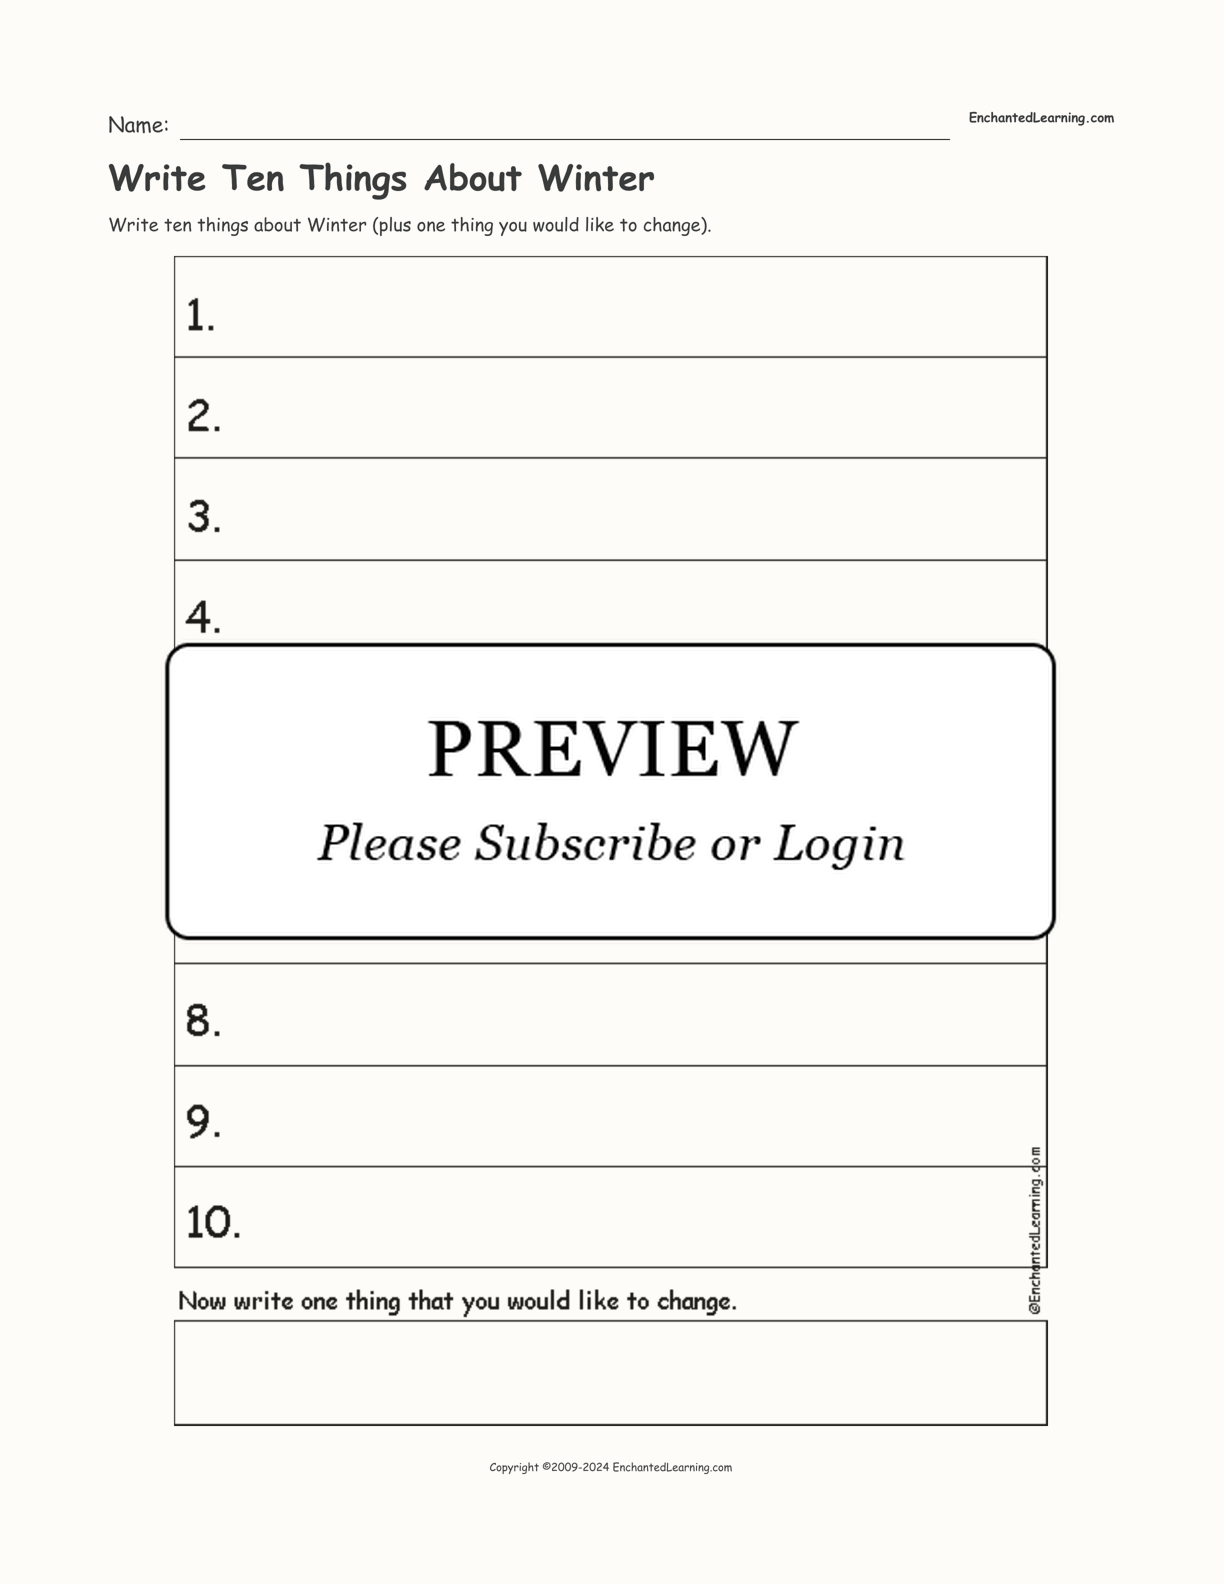 Write Ten Things About Winter interactive worksheet page 1